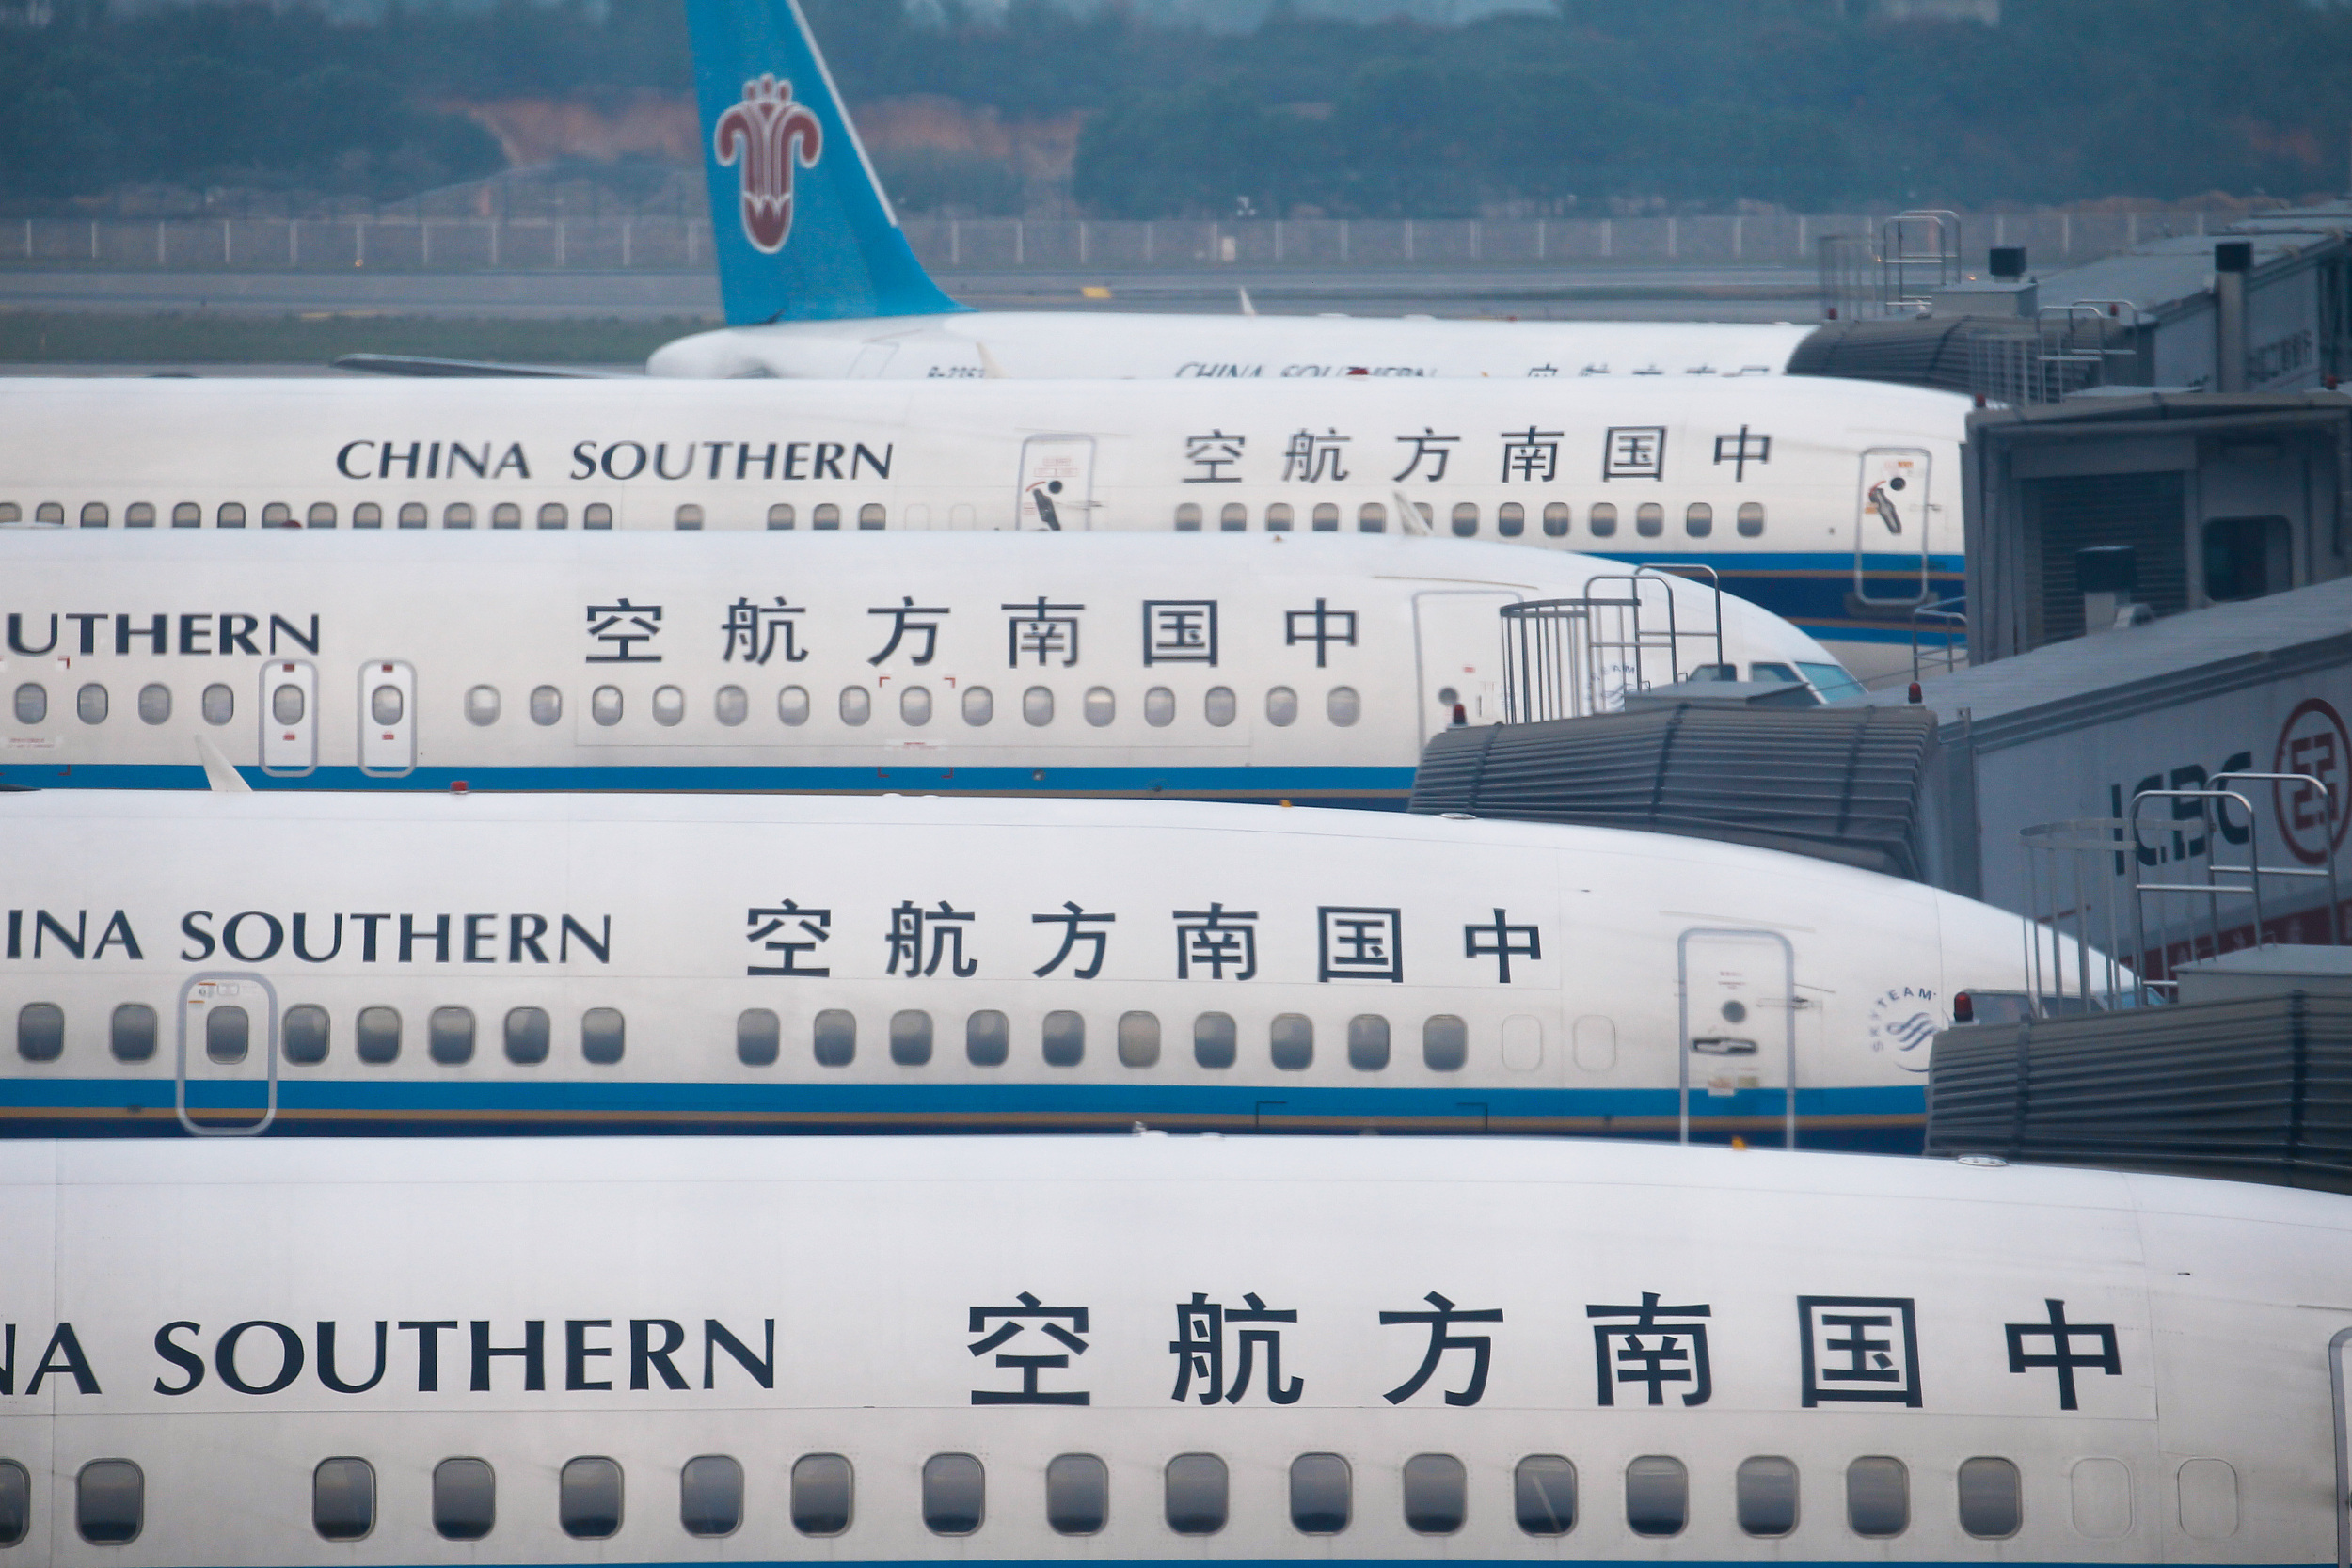 China Southern airliners sit in Guangzhou Baiyun International Airport in February 2011. Photo: VCG